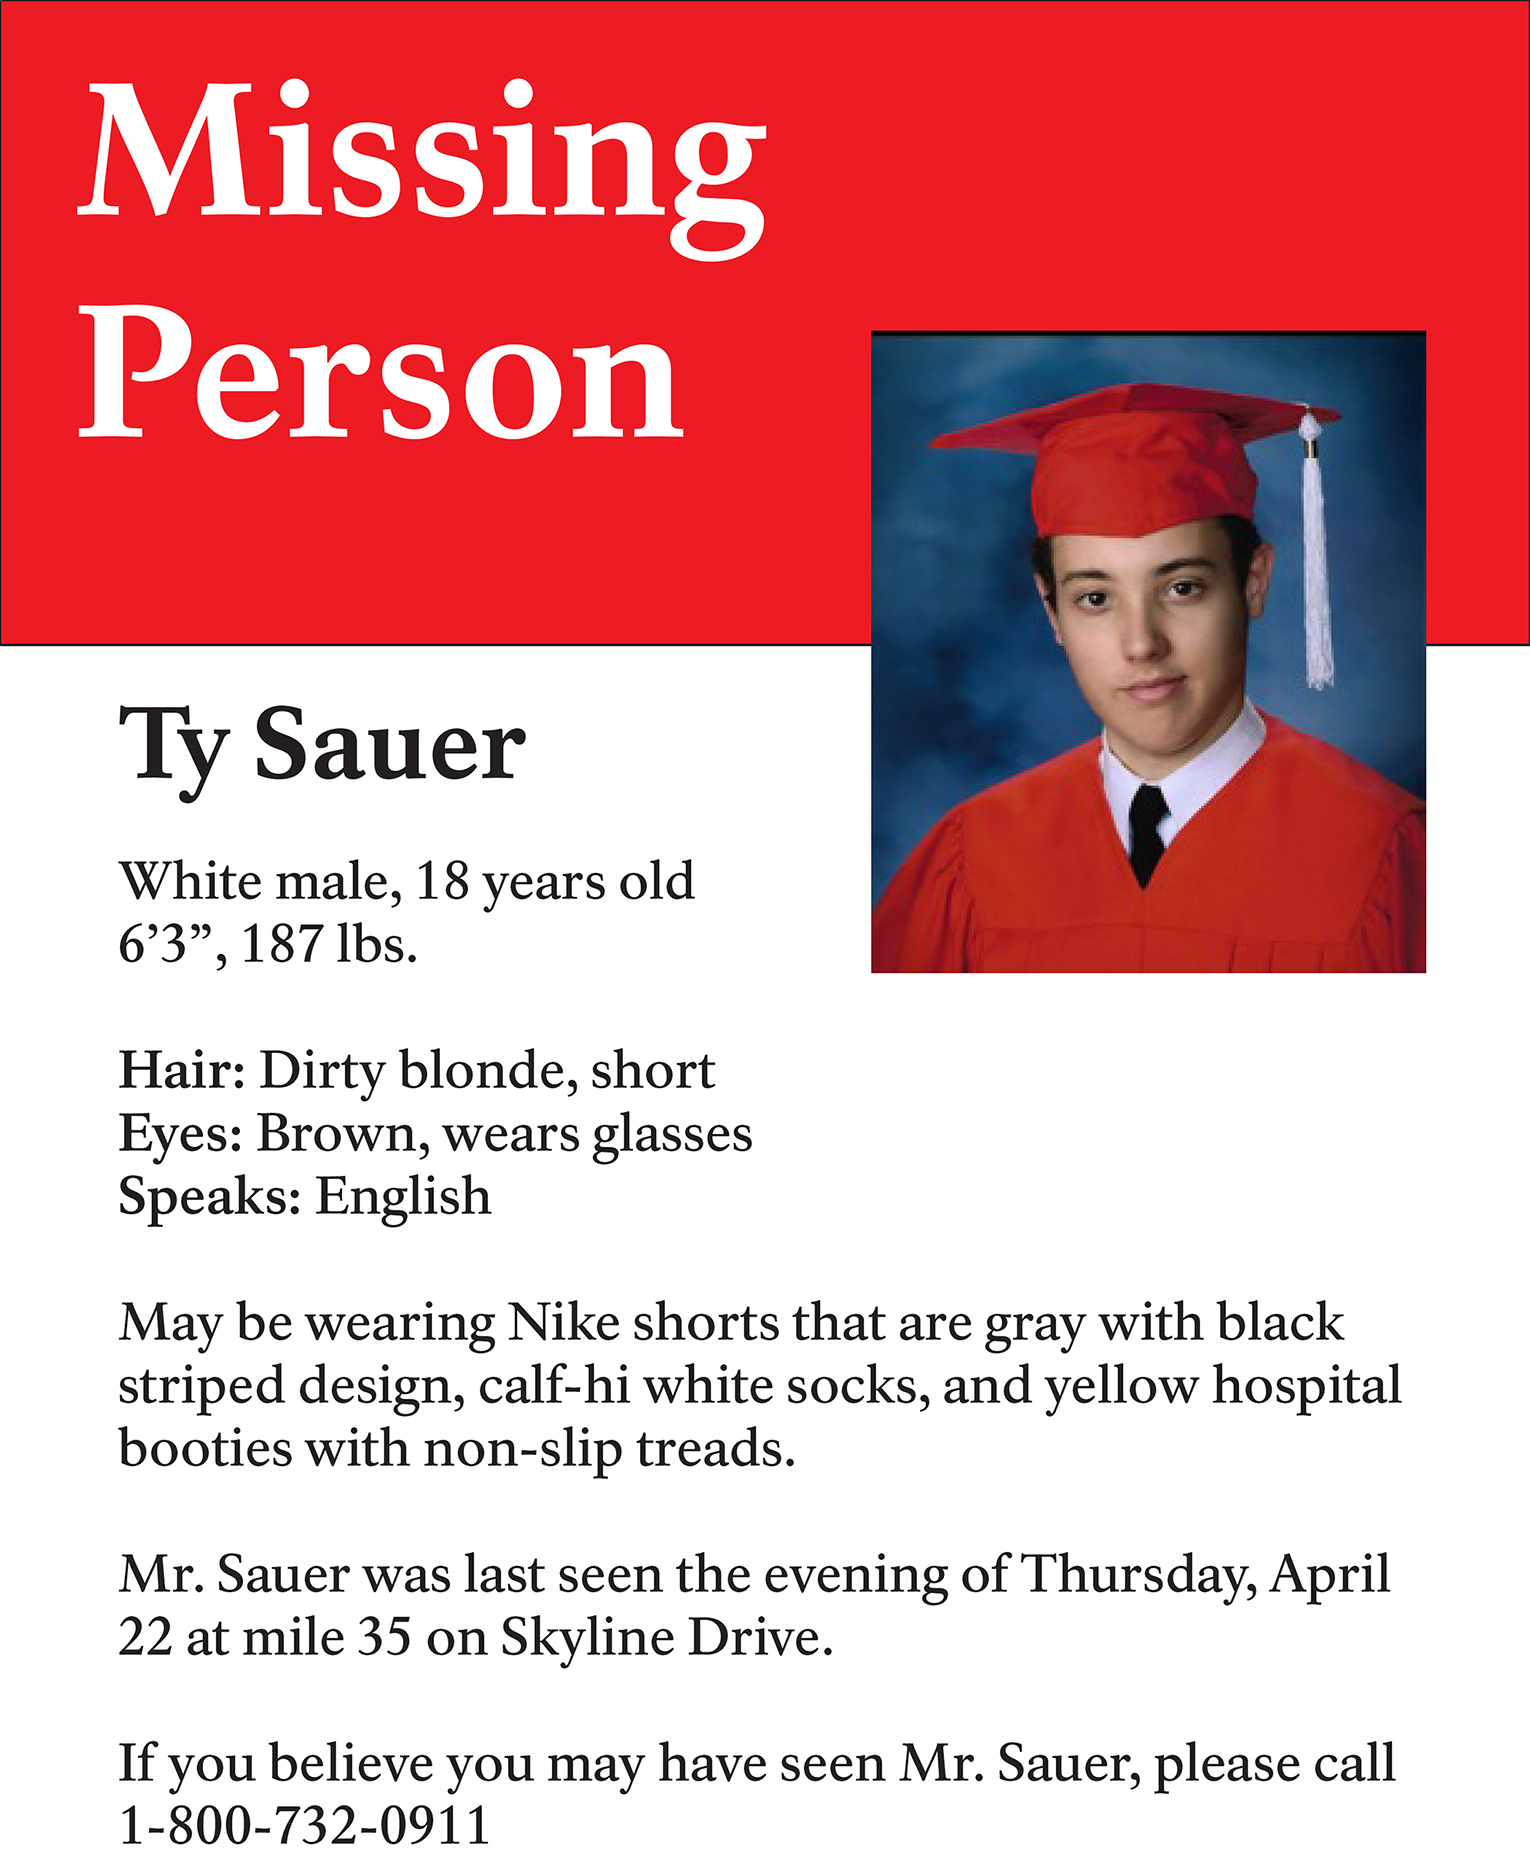 A flyer for a missing person